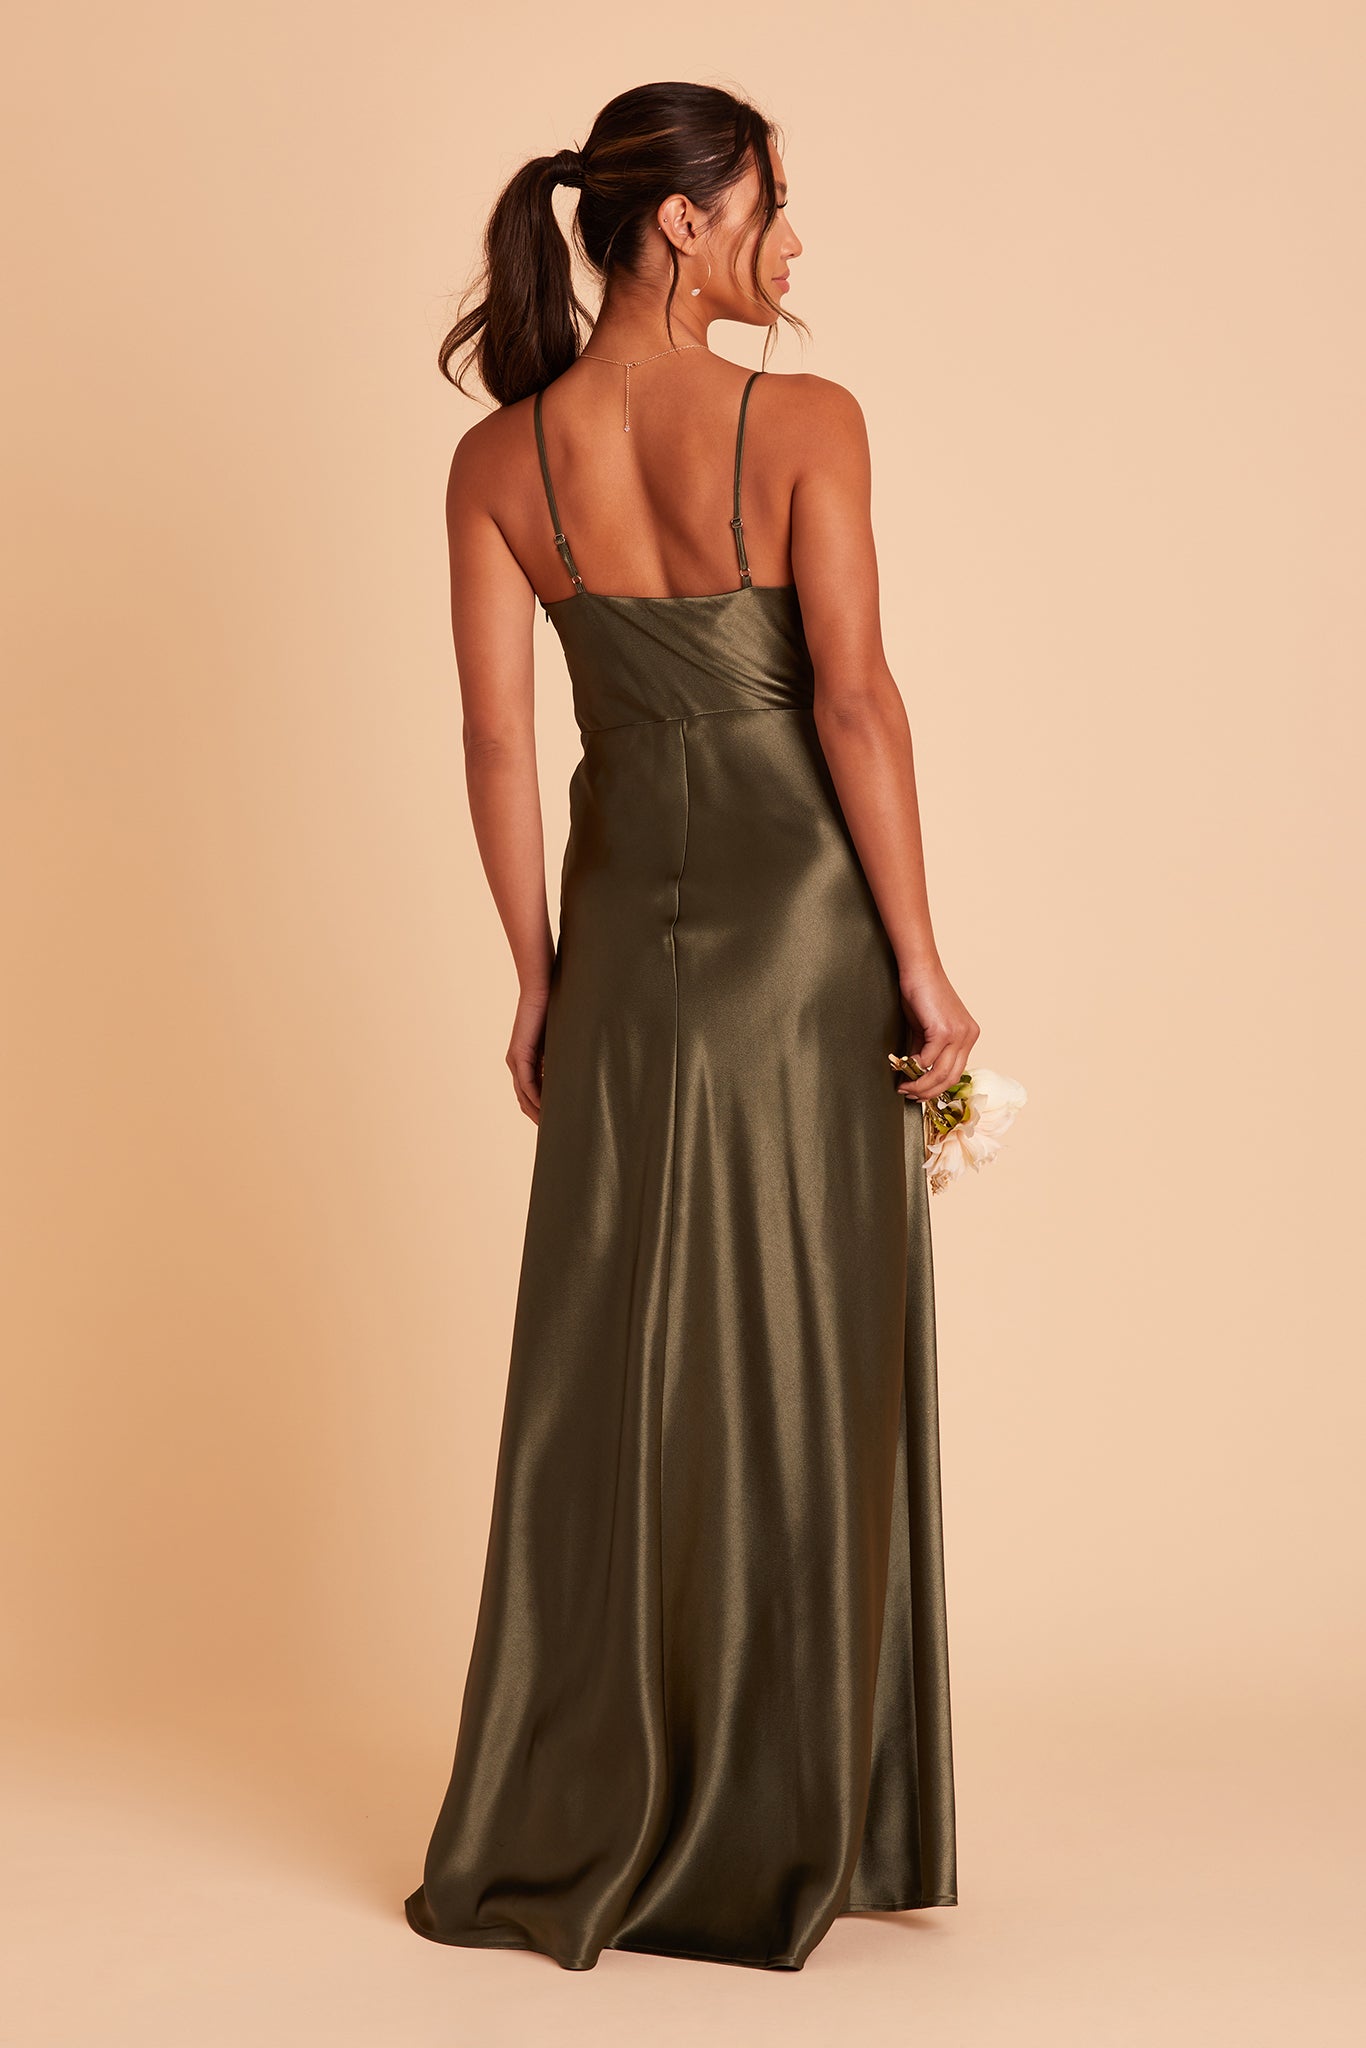 Back view of the Lisa Long Dress in olive satin shows the back of the dress with adjustable spaghetti straps and a smooth fit in the bodice and waist that attach to a full length skirt.  